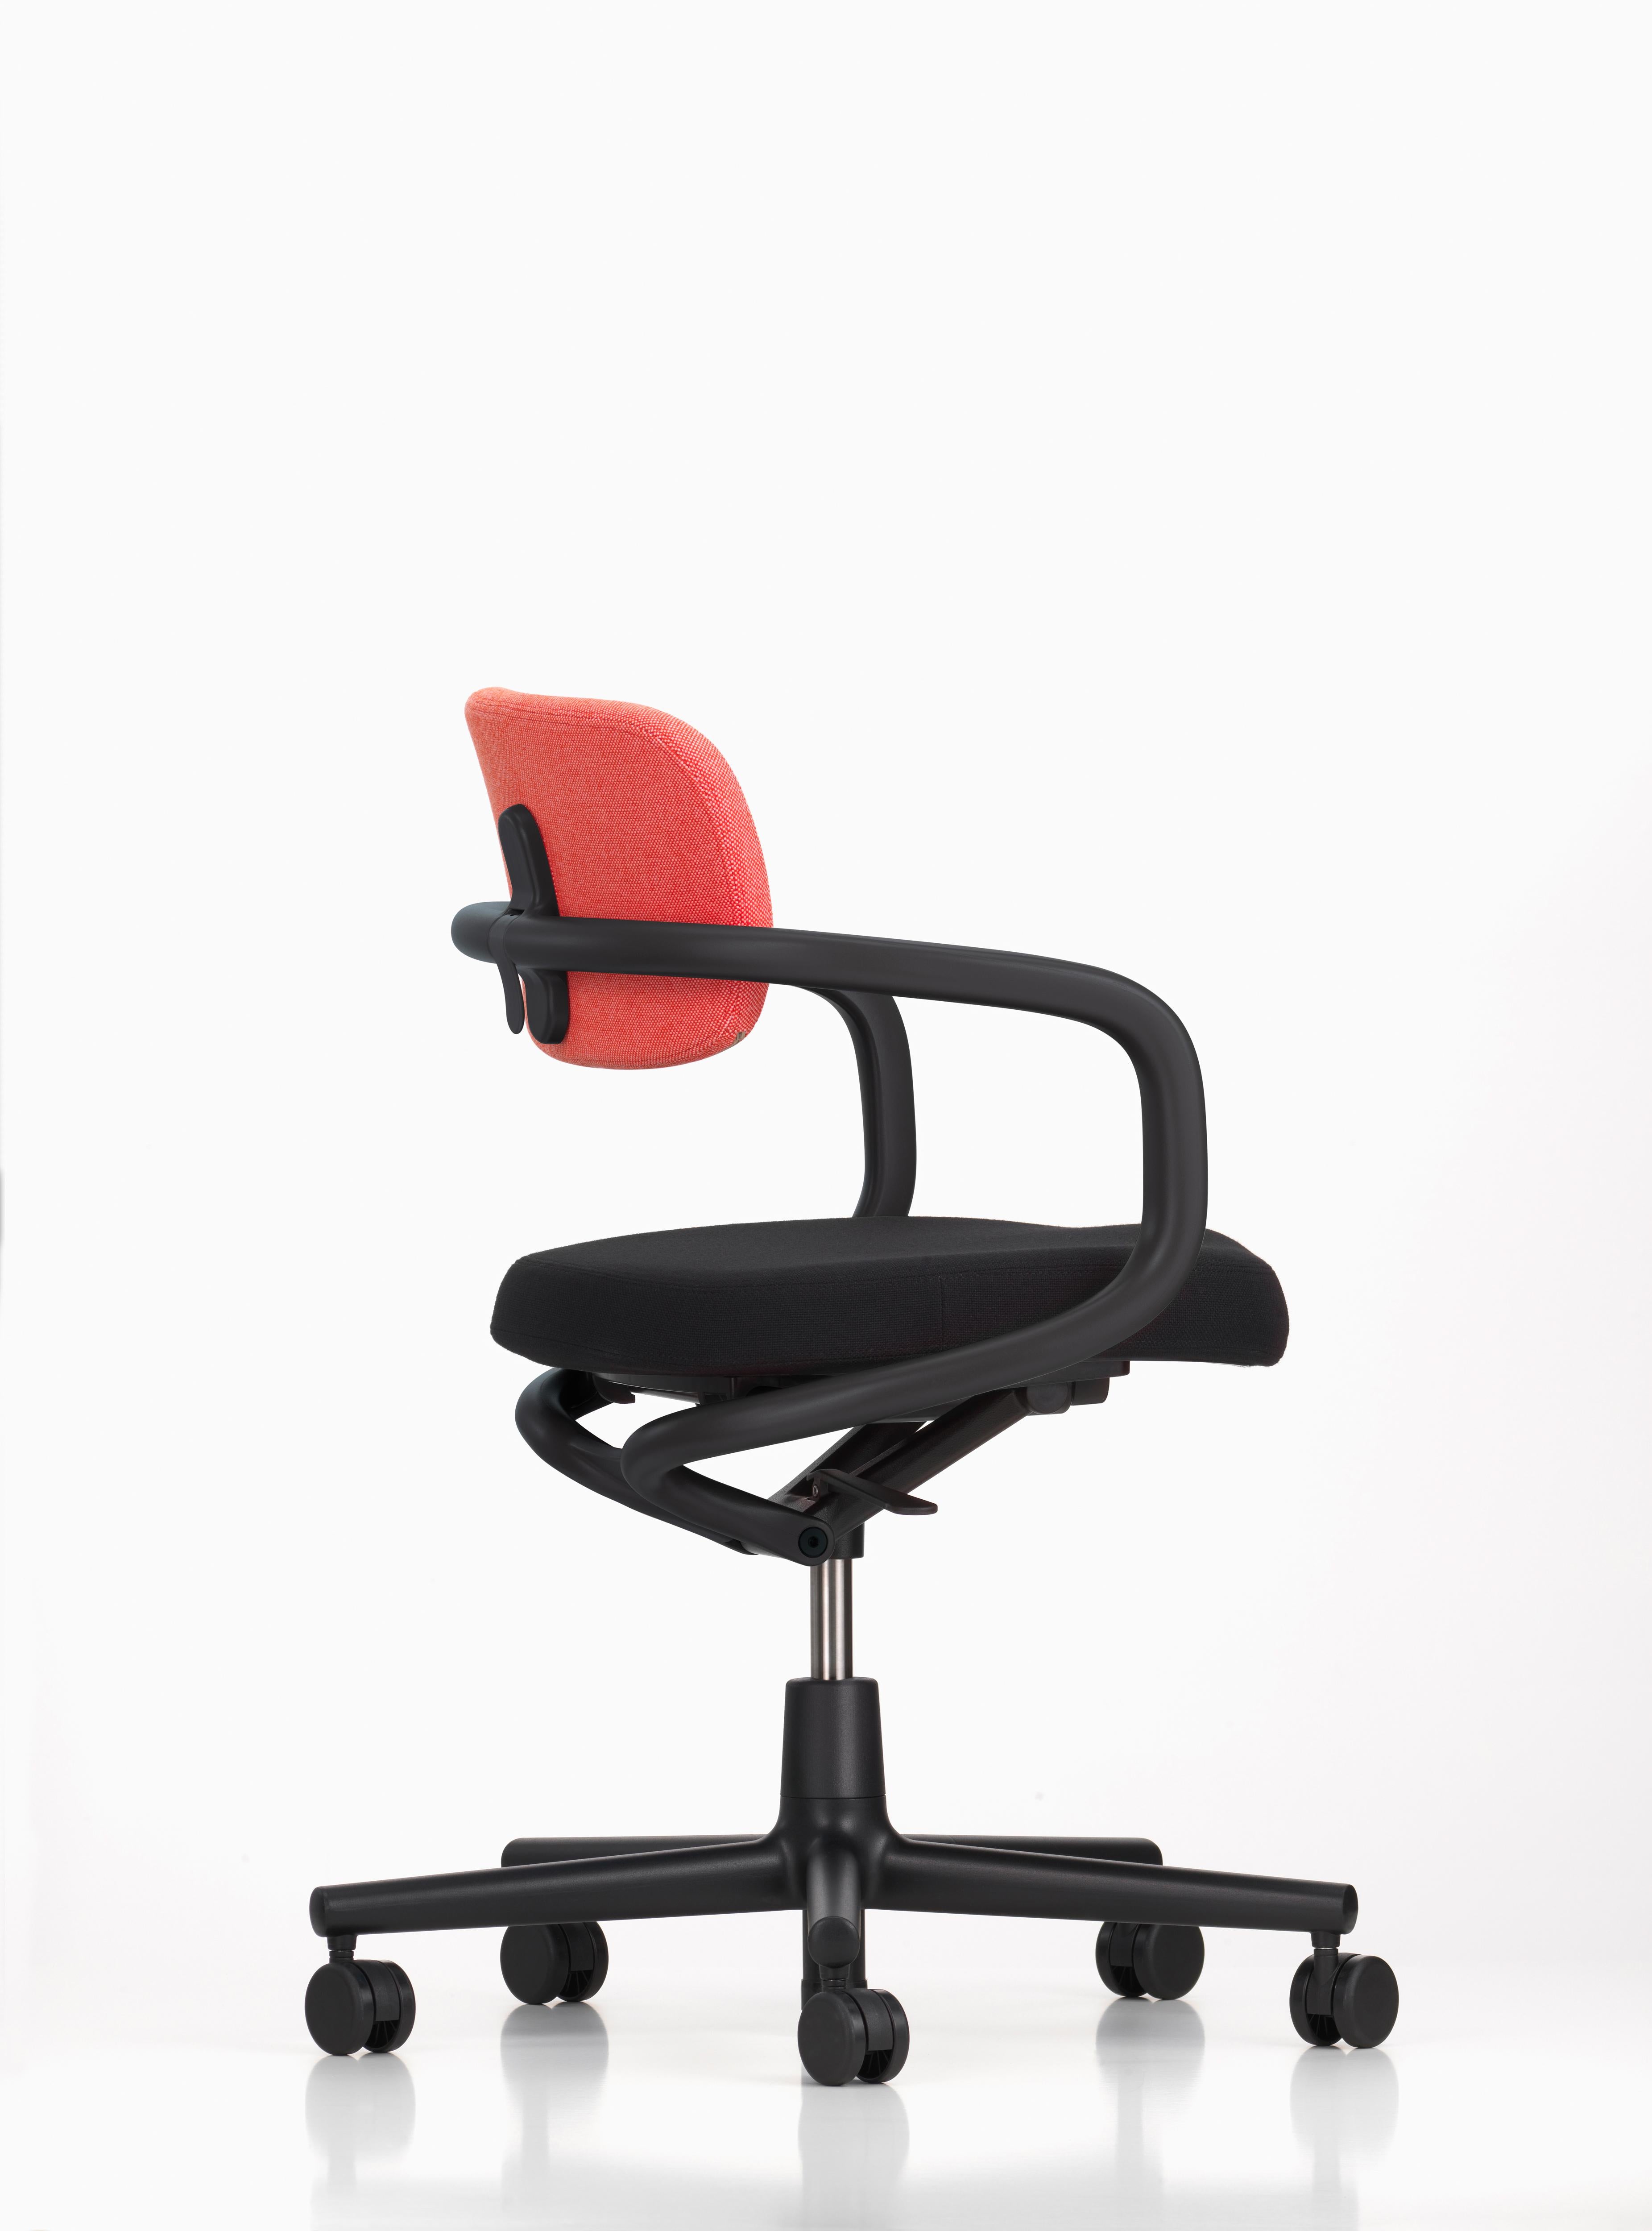 Modern Vitra Allstar Chair in Poppy Red & Ivory and Nero Hopsak by Konstantin Grcic For Sale